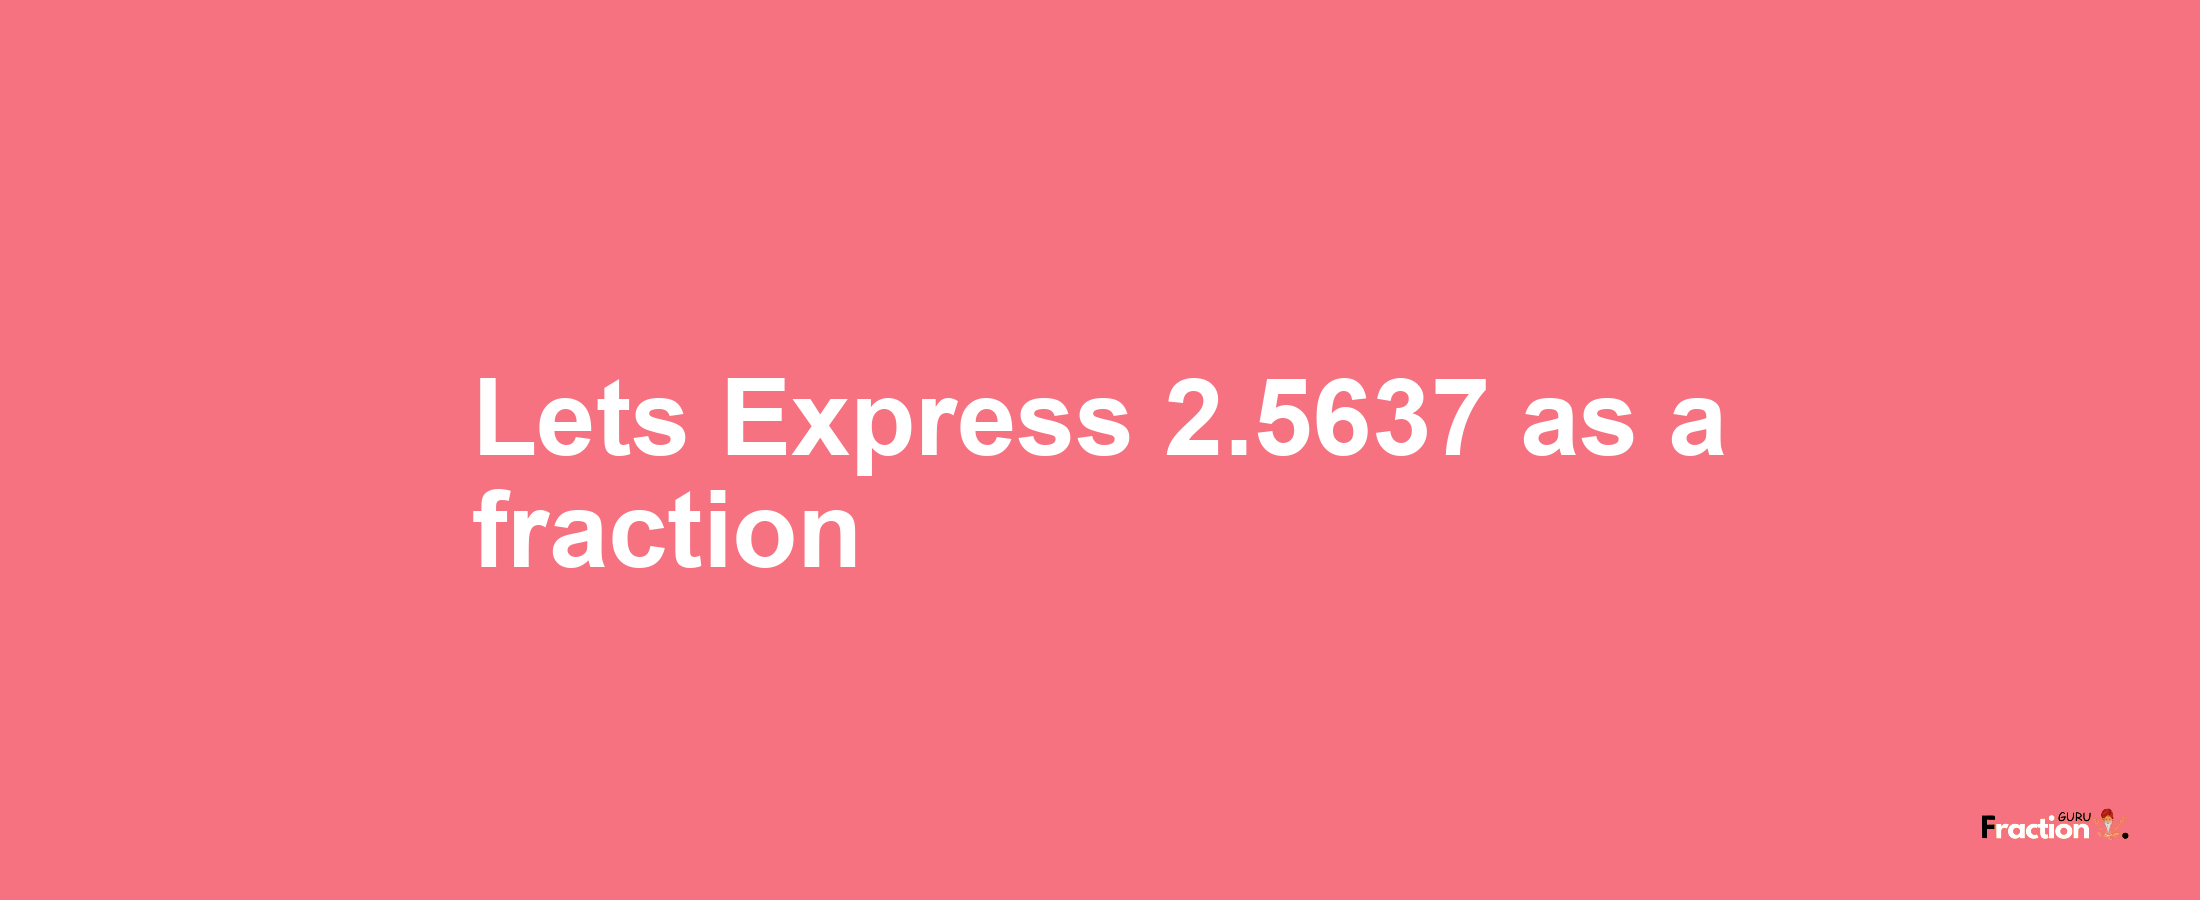 Lets Express 2.5637 as afraction